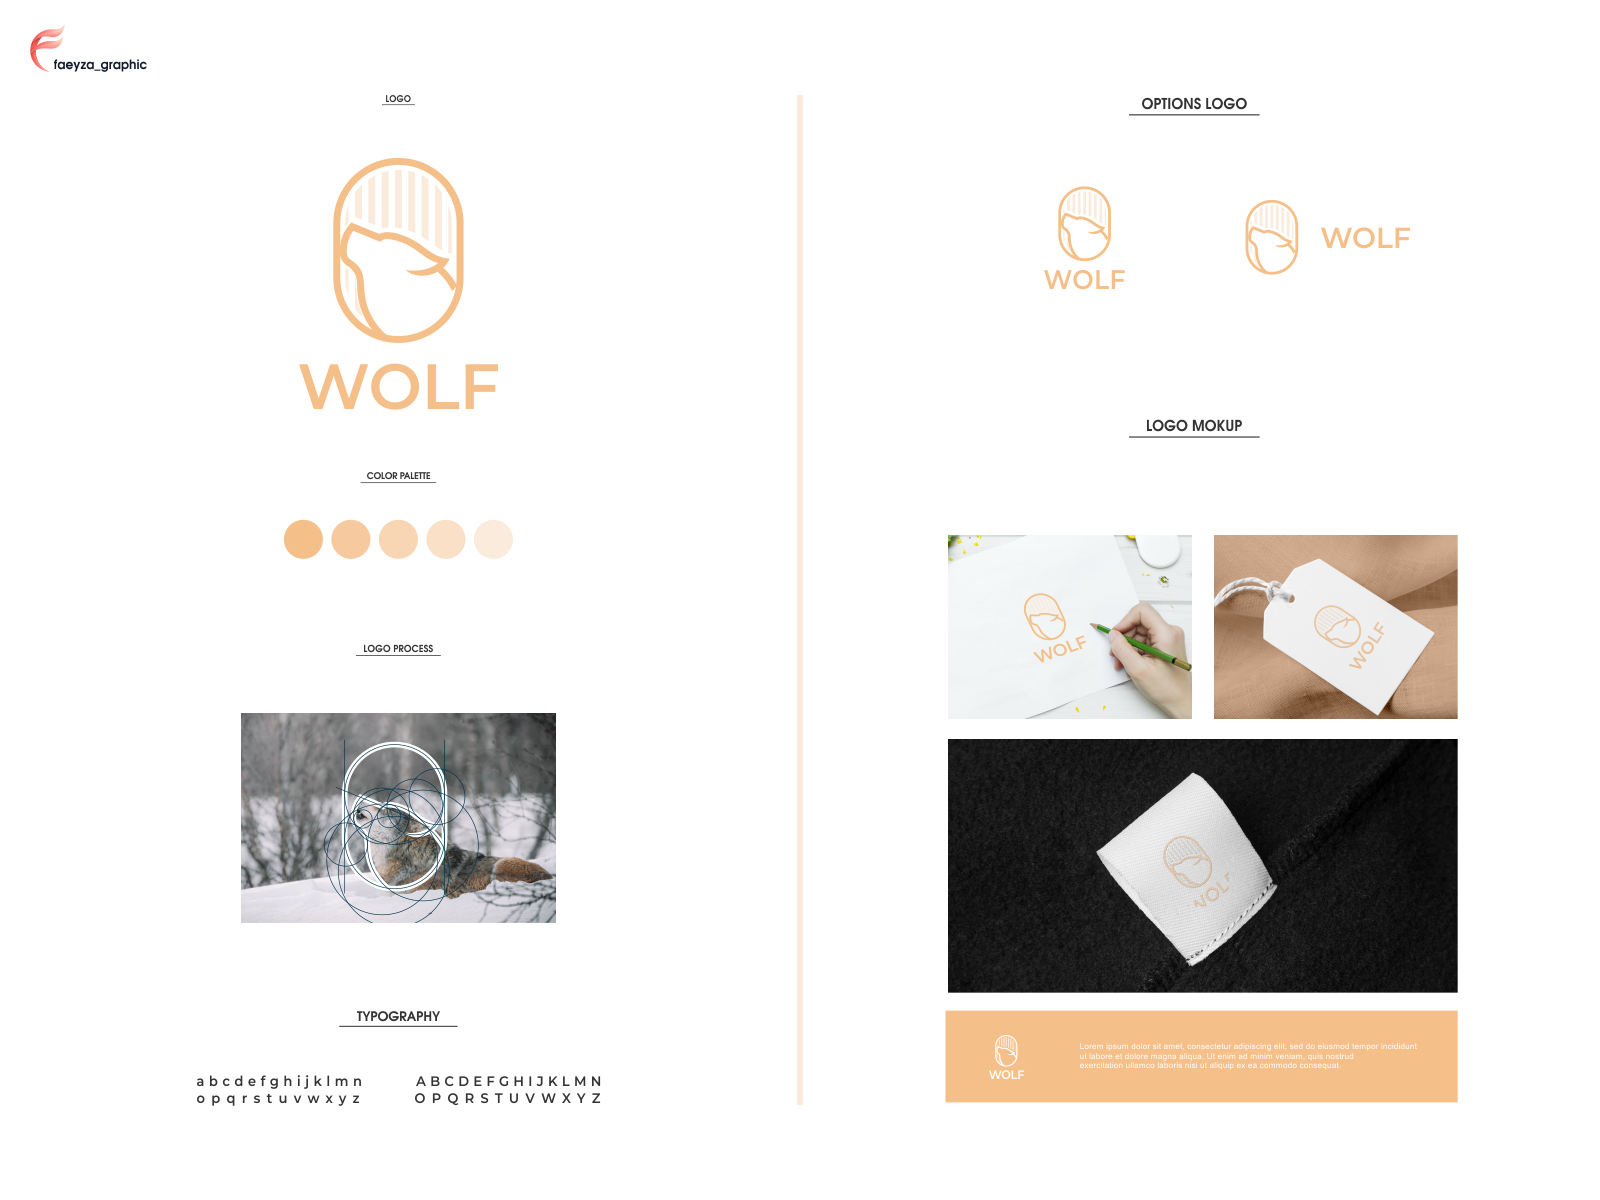 Wolf logo by faeyza graphic on Dribbble